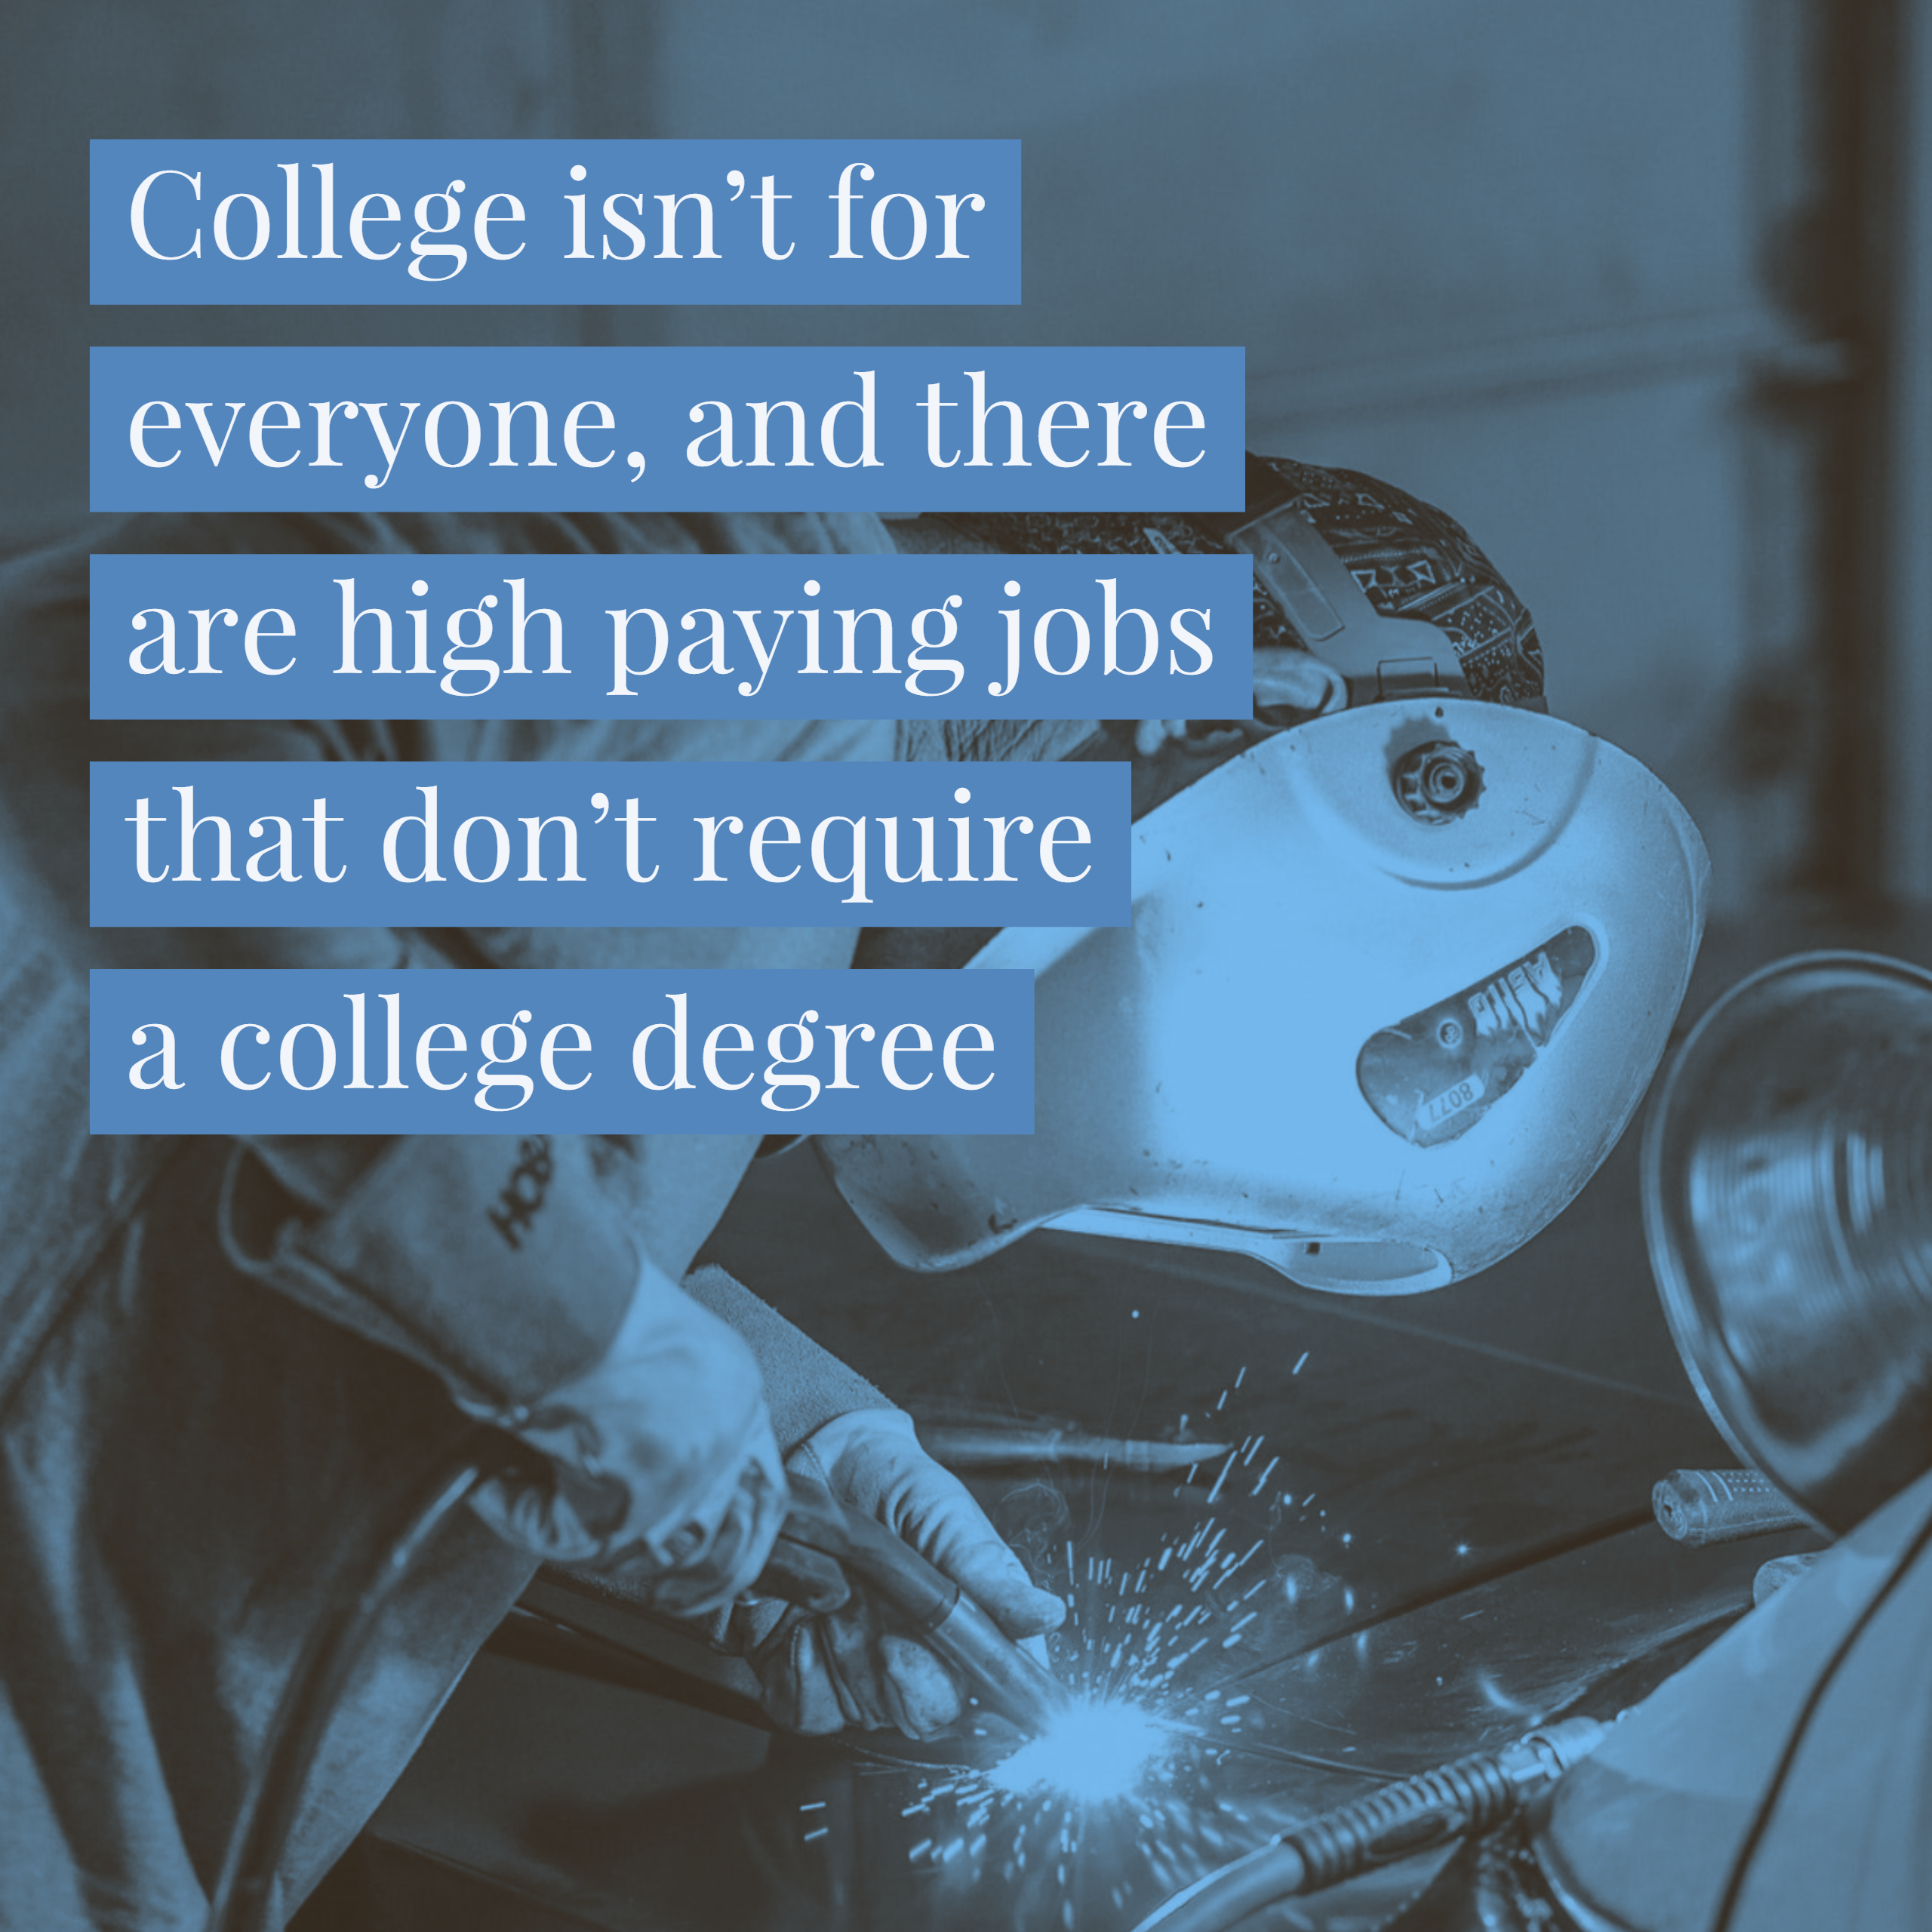 College isn’t for everyone, and there are high paying jobs that don’t require a college degree